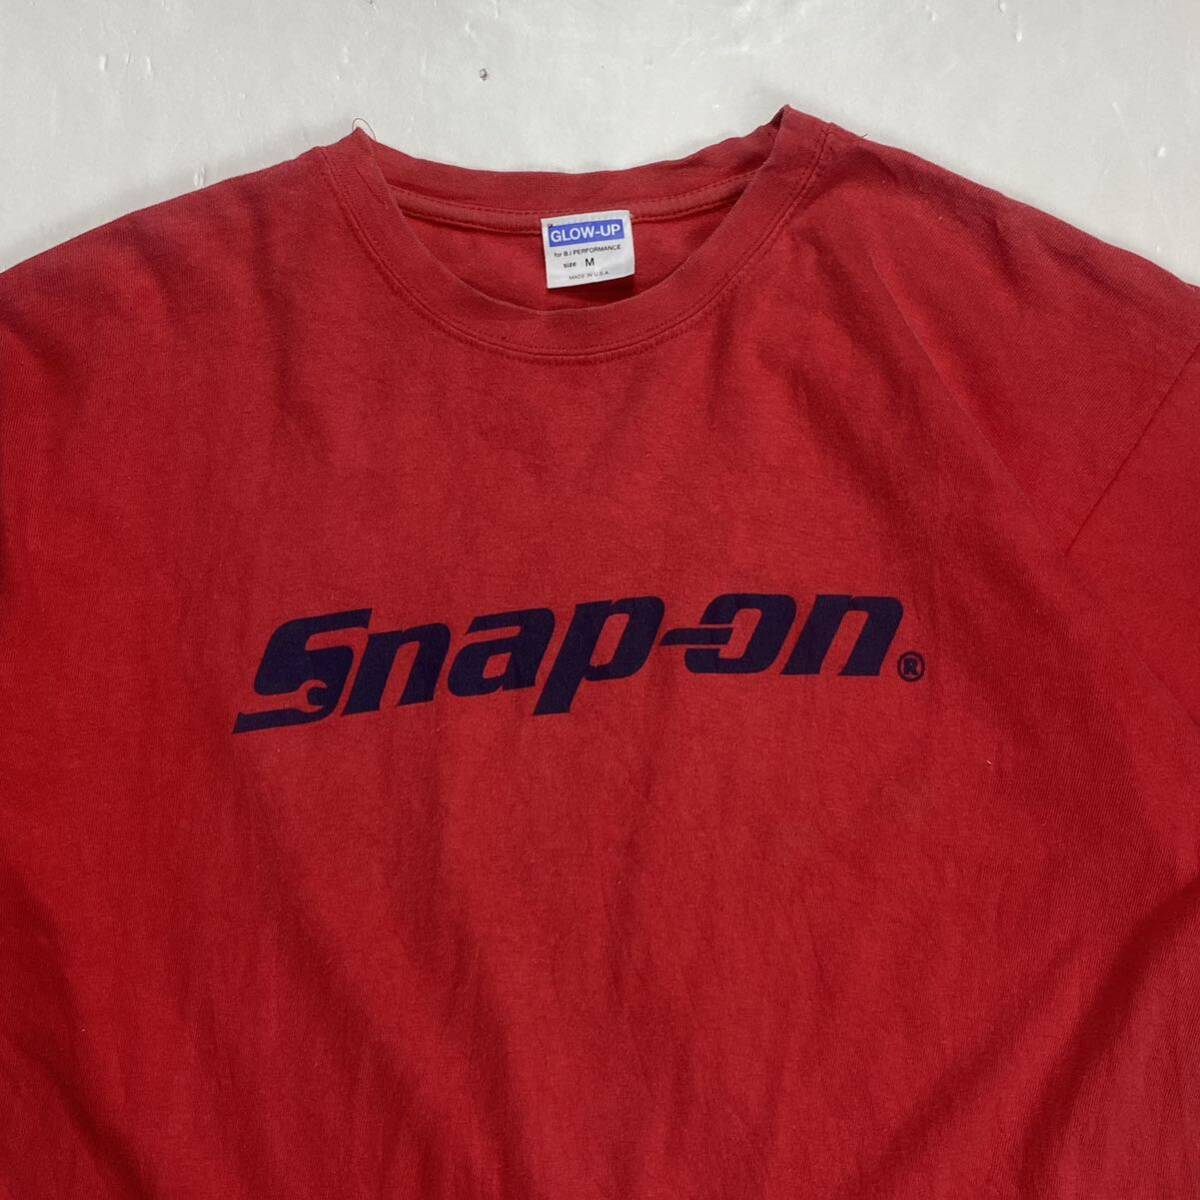  America made Snap-on Snap-on Logo print short sleeves T-shirt red M automobile bike 